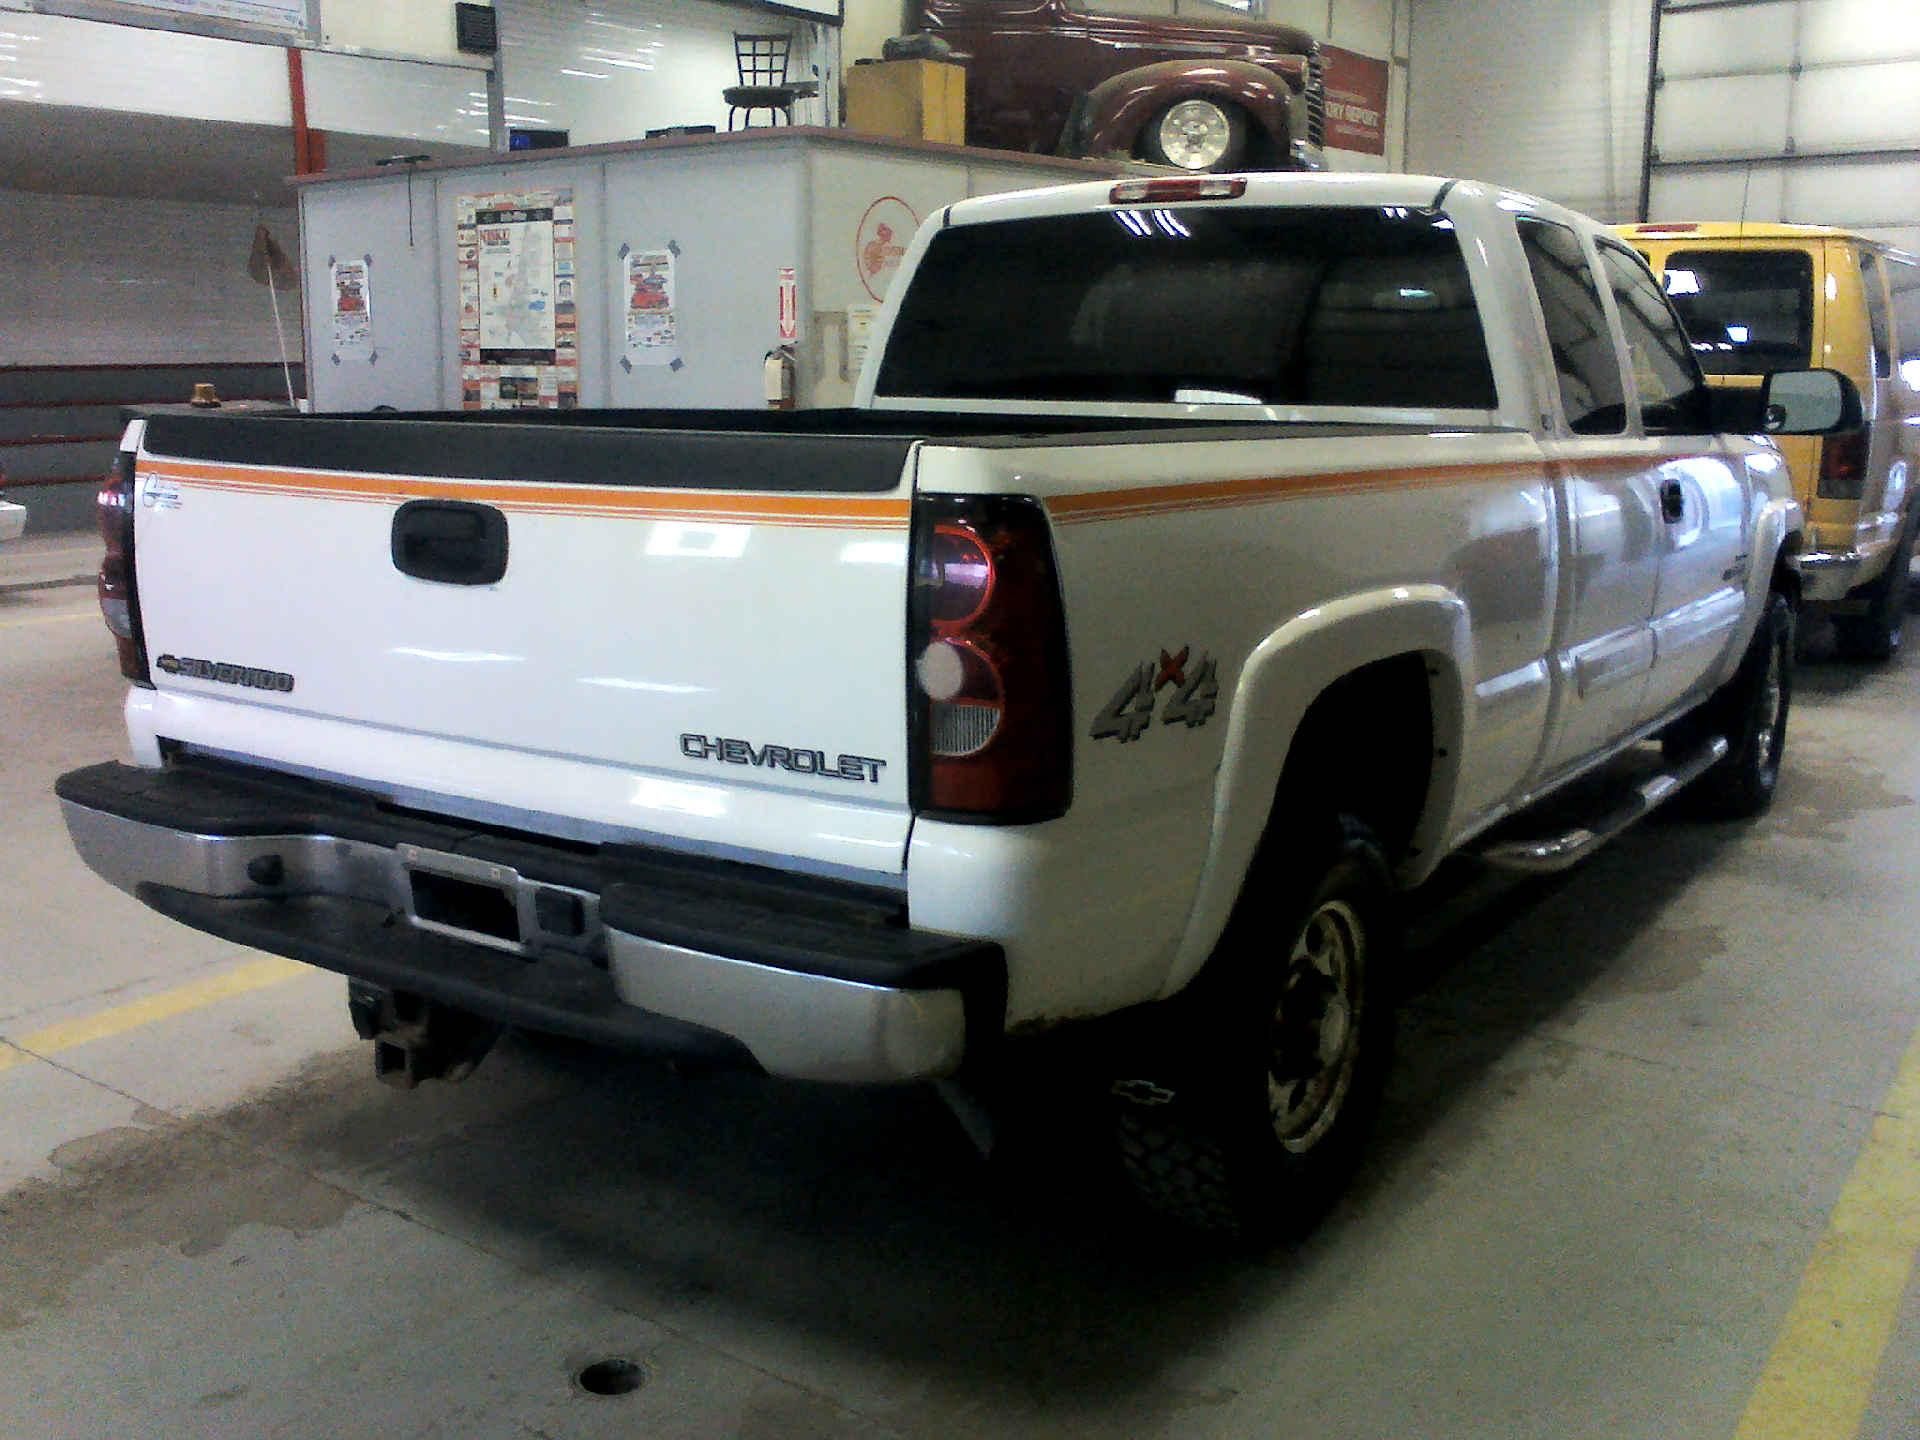 2005 CHEVROLET SILVERADO 2500HD EXT. CAB SHORT BED 4WD 6.6L V8 OHV 32V TURBO DIESEL AUTOMATIC SN: - Image 4 of 9